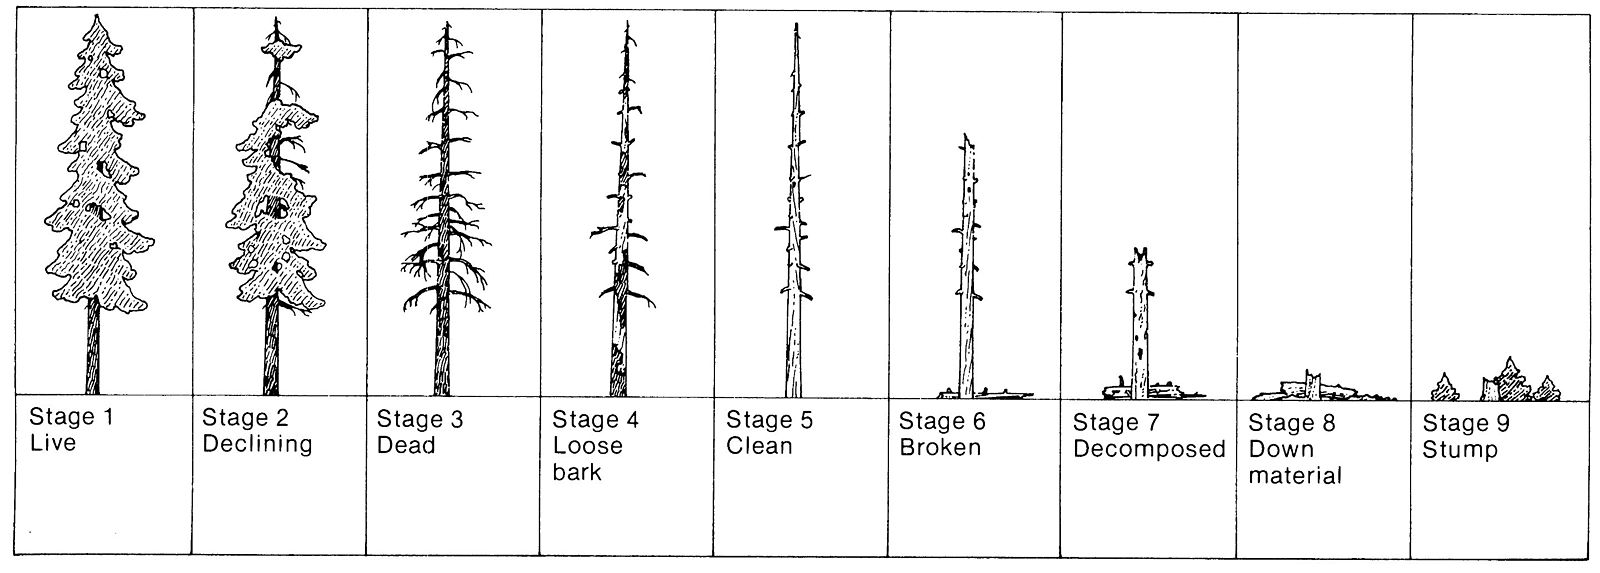 Snag Stages by USDA Forest Service, Wikimedia Commons